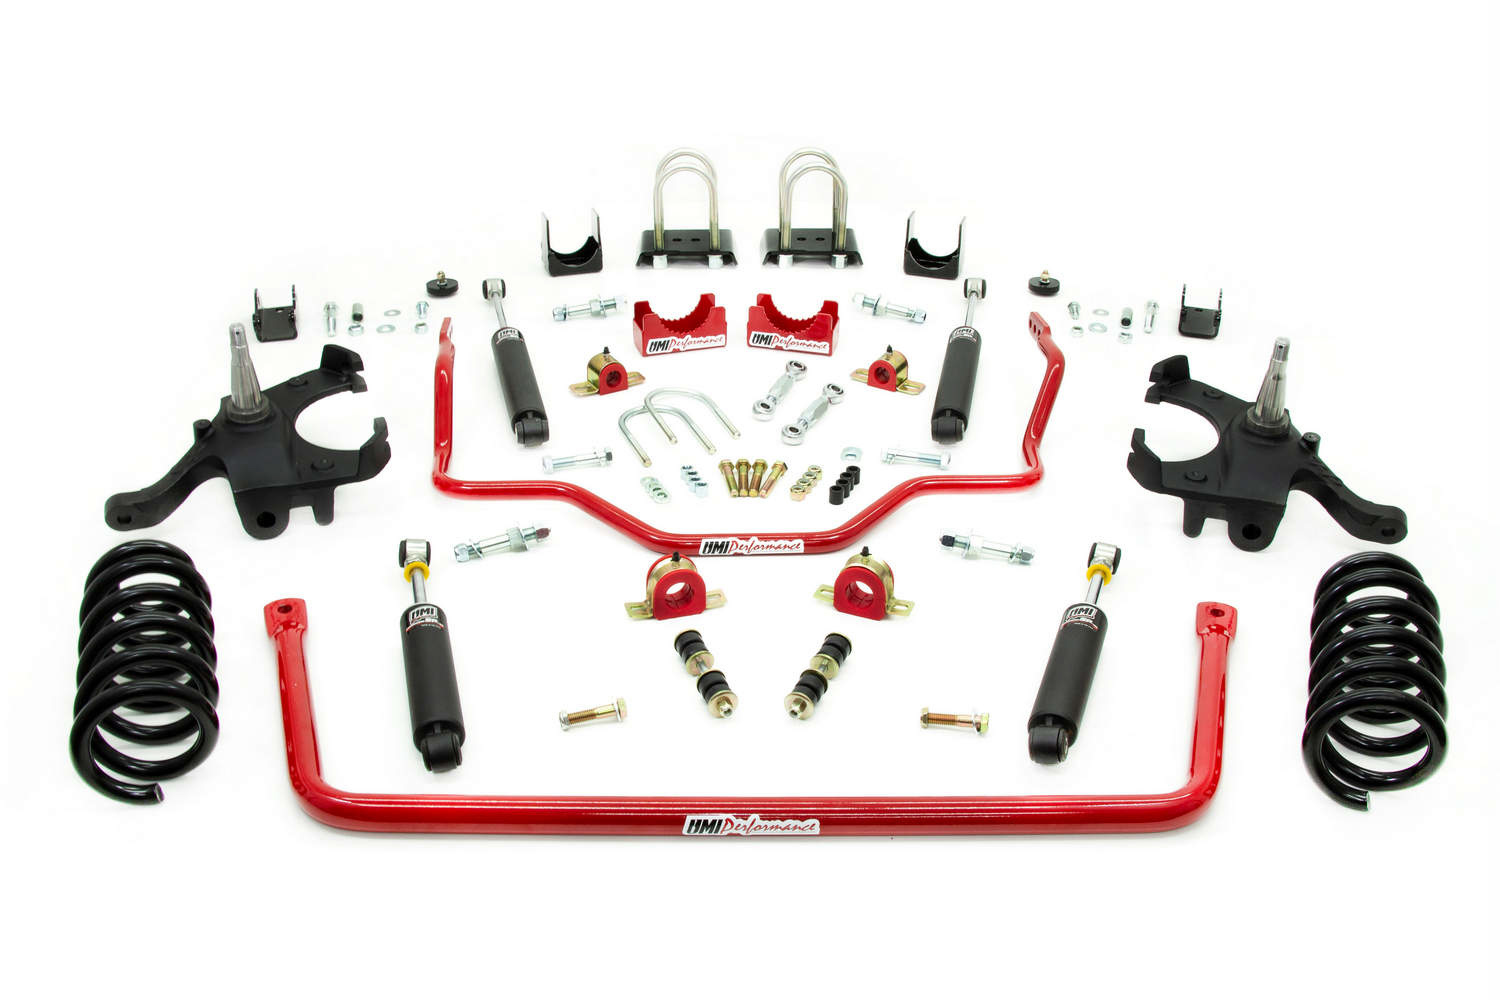 UMI Performance 73-87 GM C10 Handling and Lowering Kit Stage 2 4.5inF/6inR UMI Shocks - Red - 6402-R